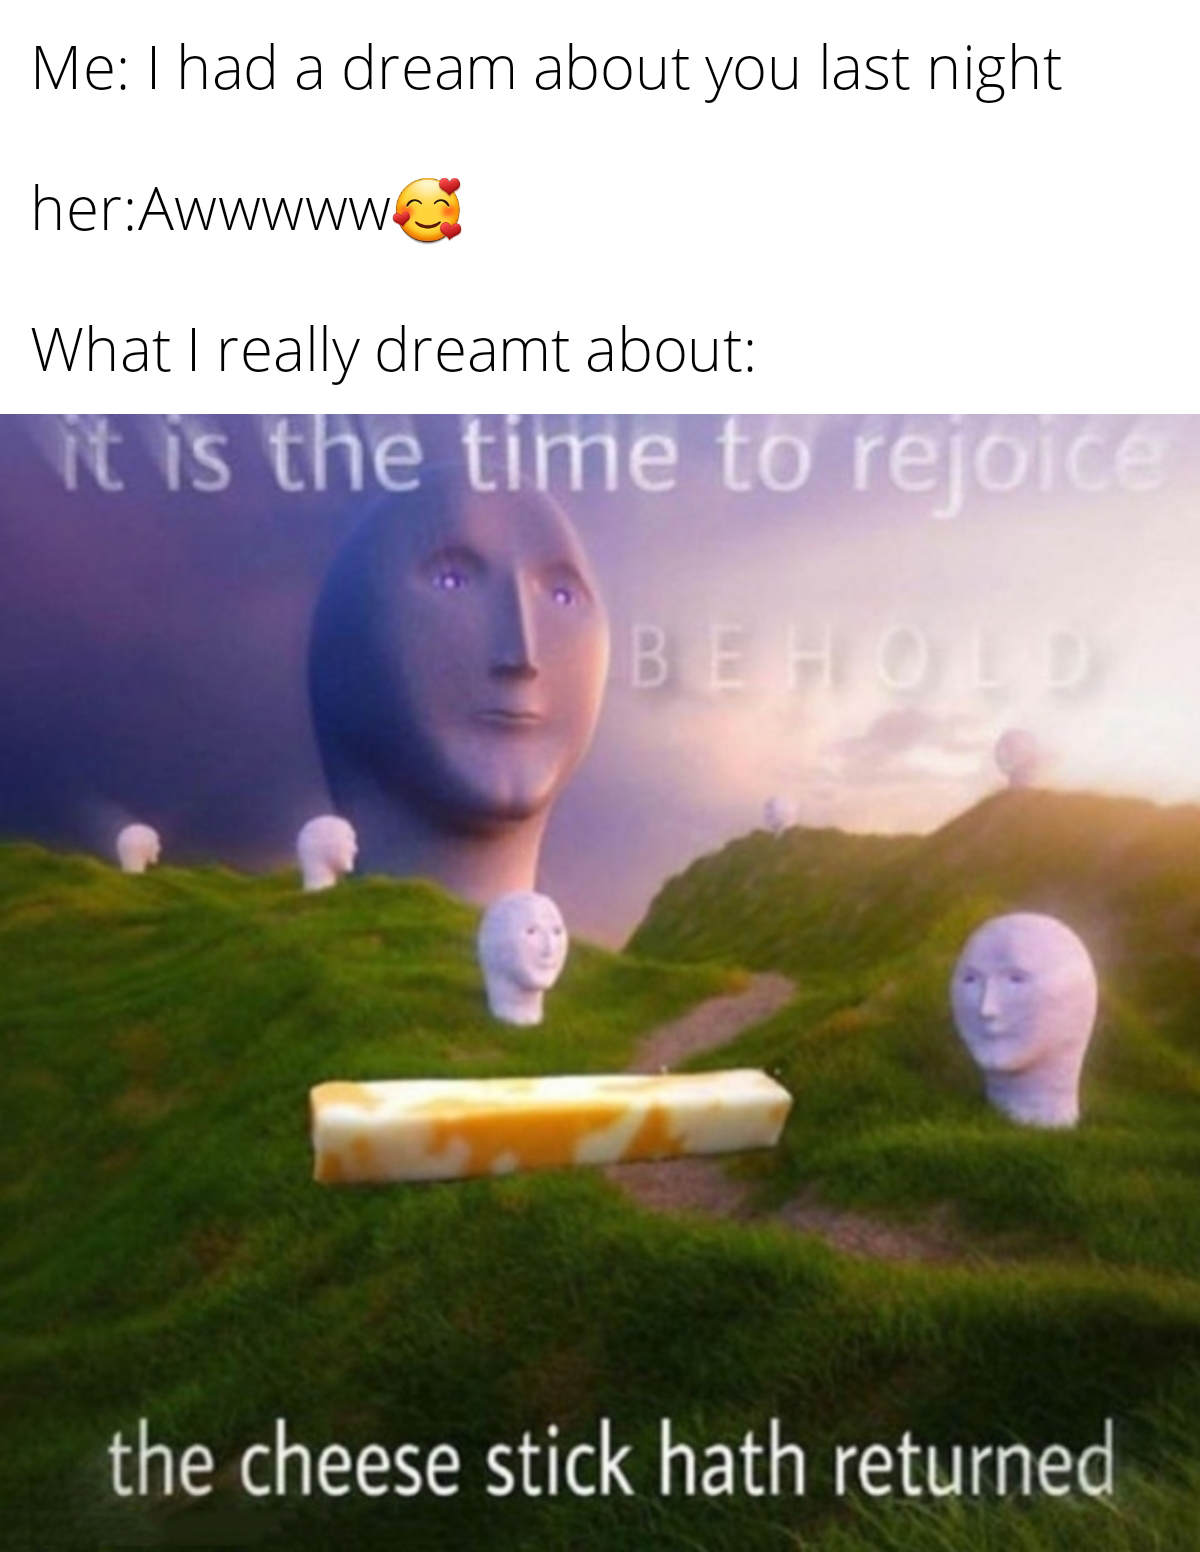 dank memes - funny memes - cheese stick meme - Me I had a dream about you last night herAwwwww What I really dreamt about it is the time to rejoice Behou the cheese stick hath returned